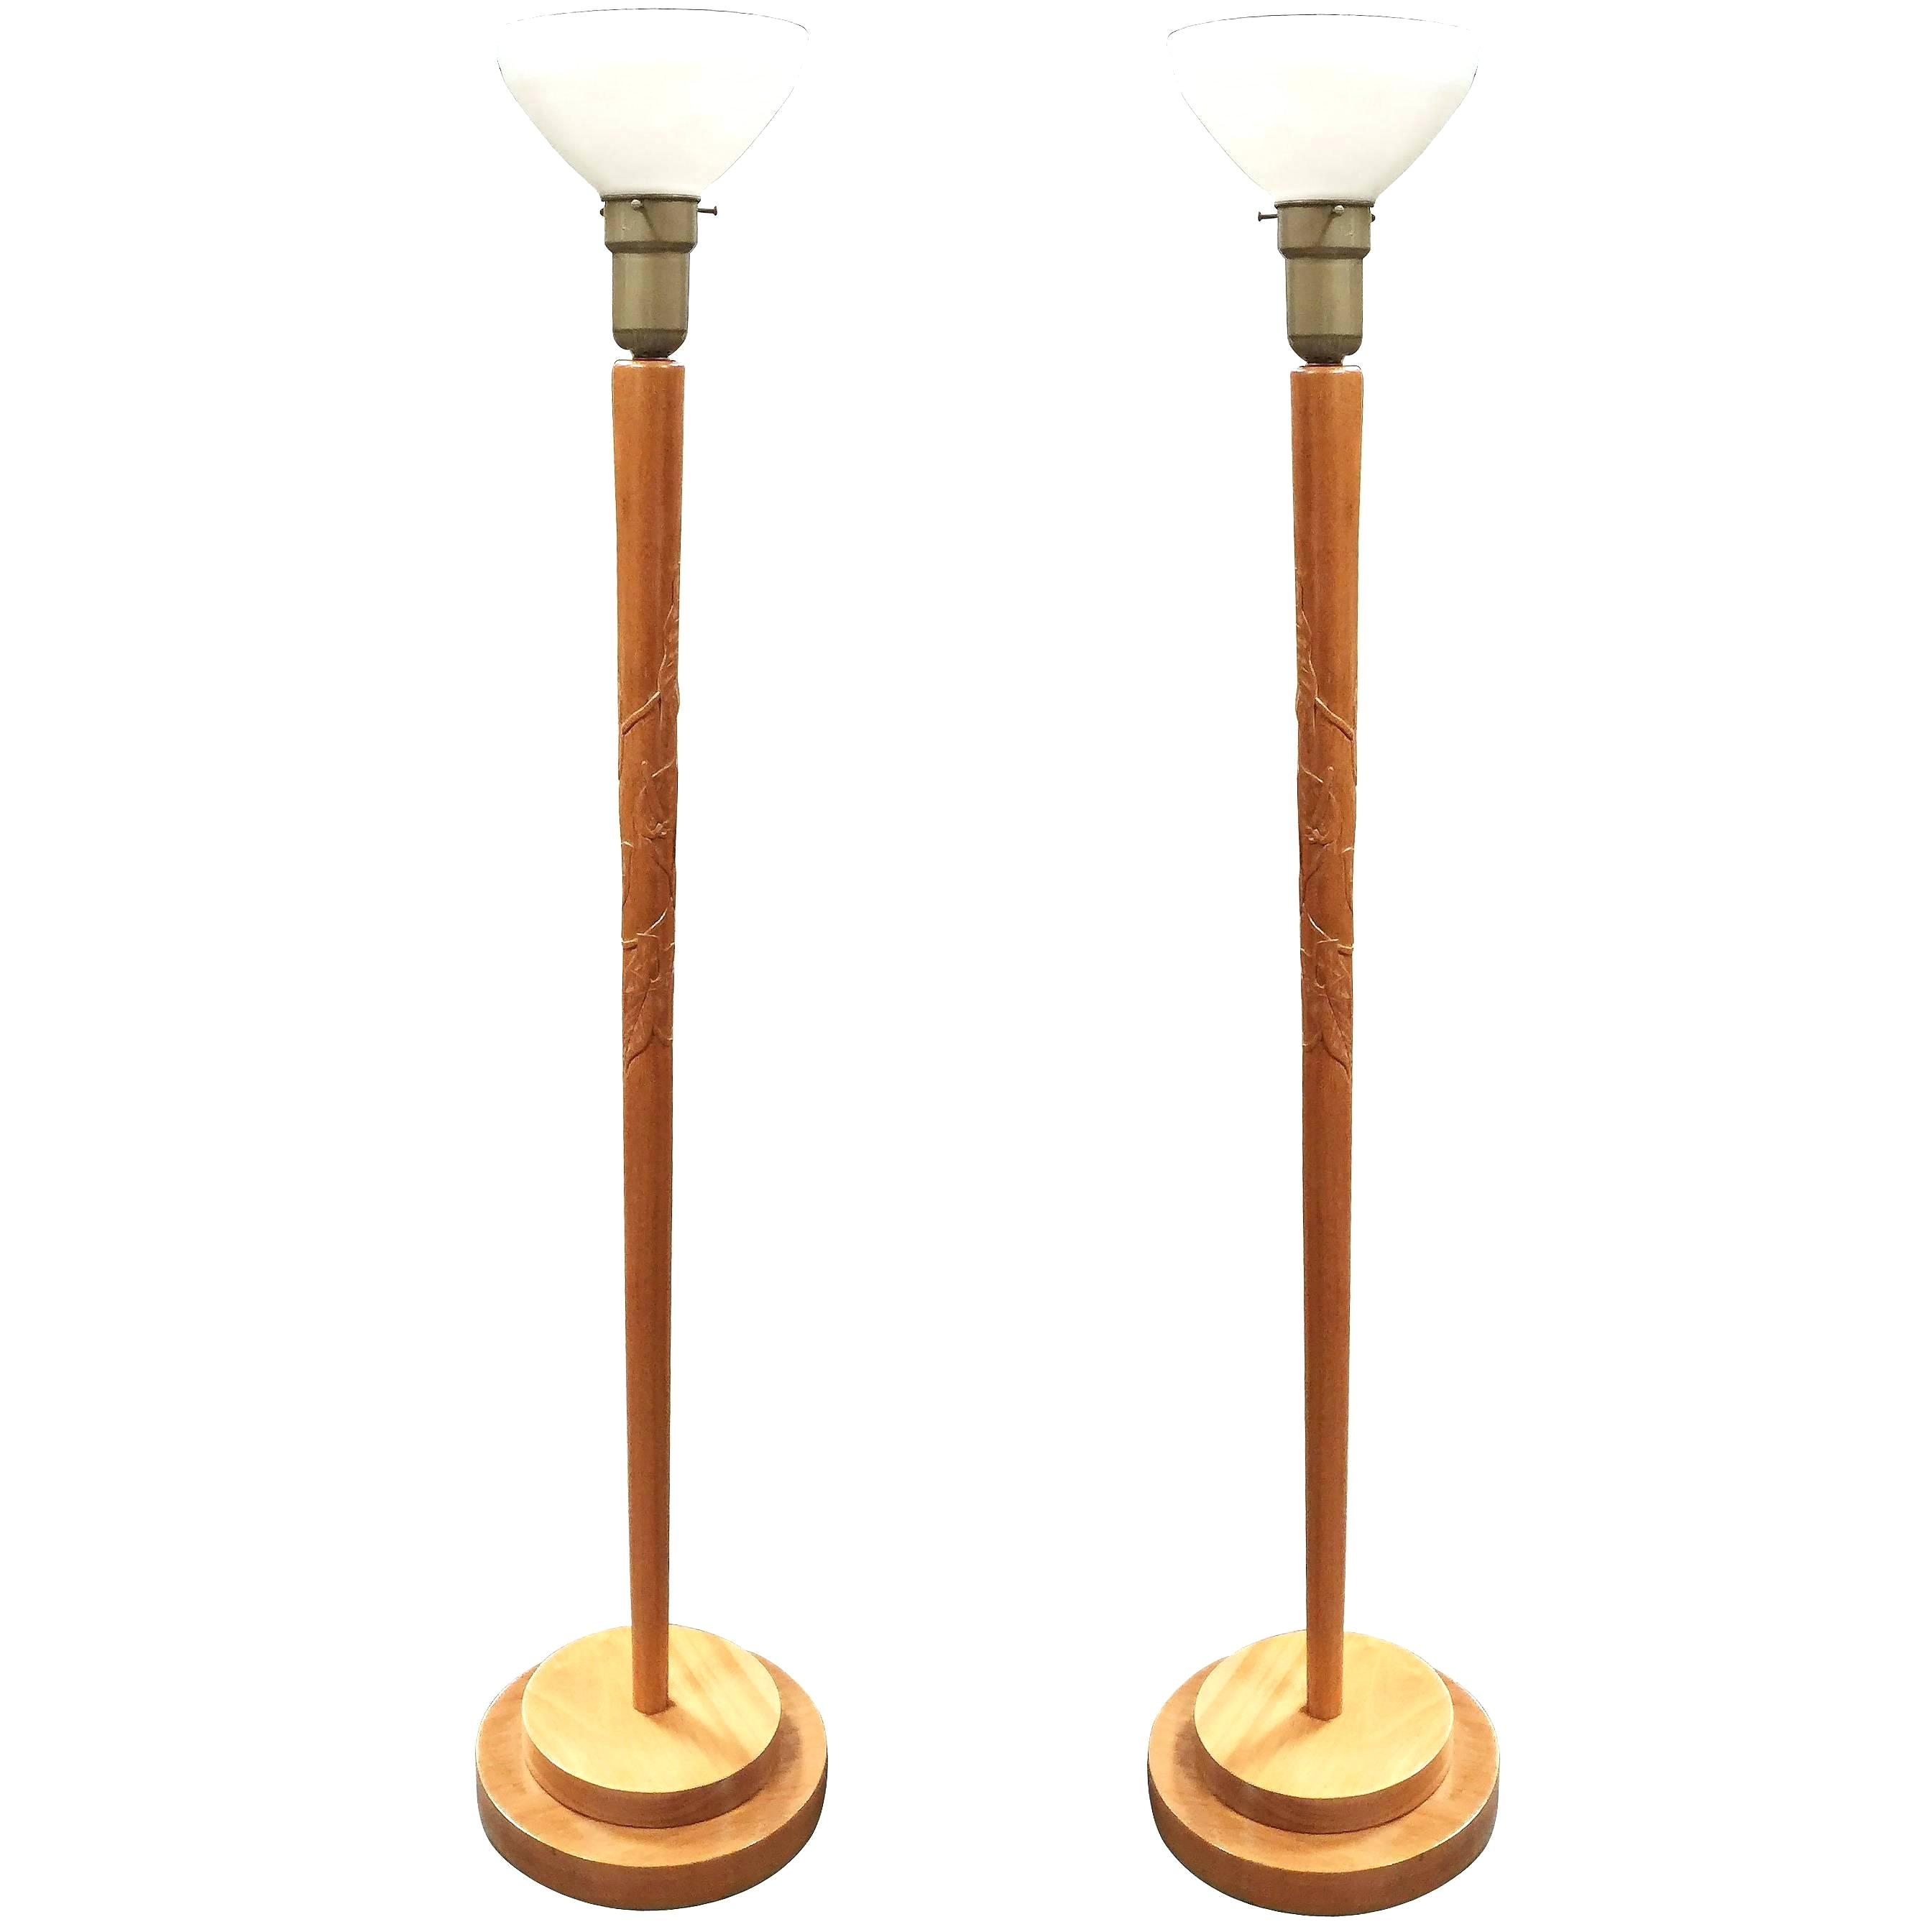 Wood Torchiere Floor Lamp Cyclingheroes in dimensions 2688 X 2688